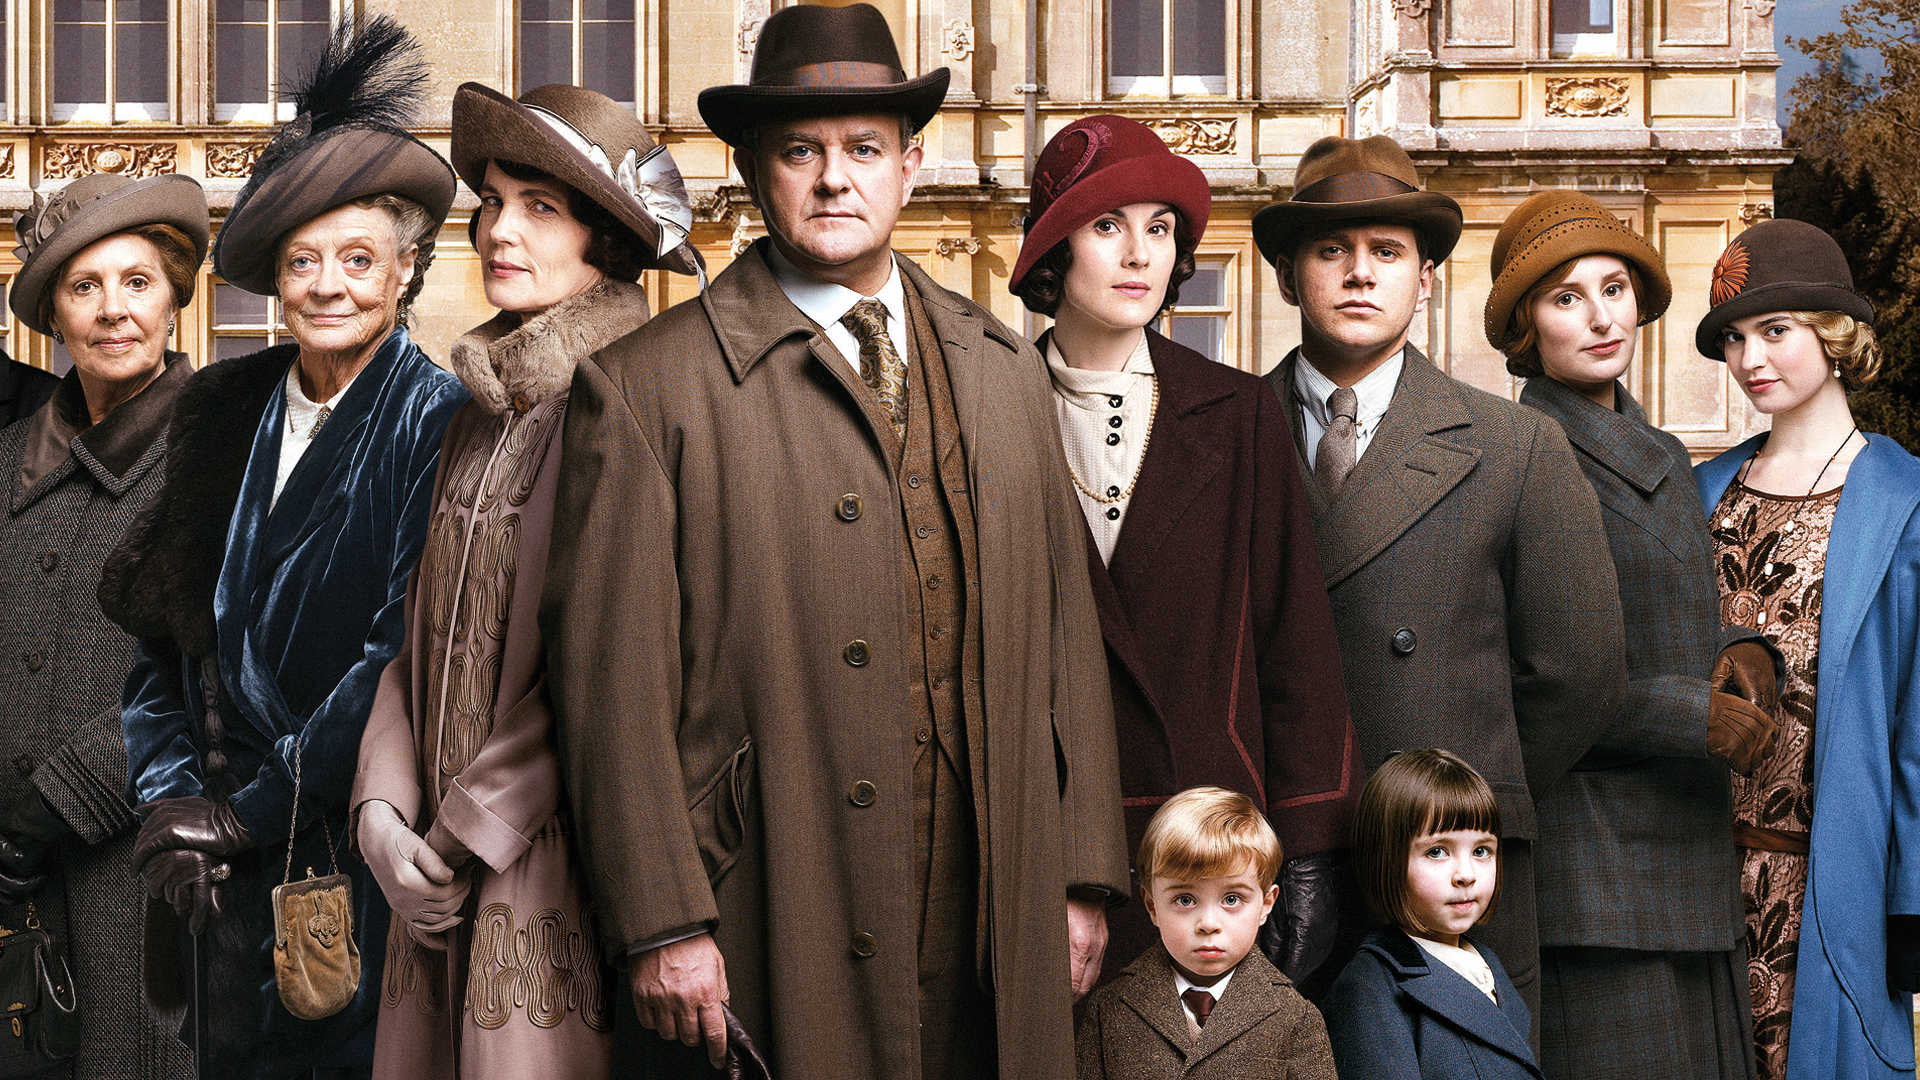 The "Downton Abbey" Season 5 cast. (Photo: Courtesy of ©Nick Briggs/Carnival Films 2014 for MASTERPIECE))